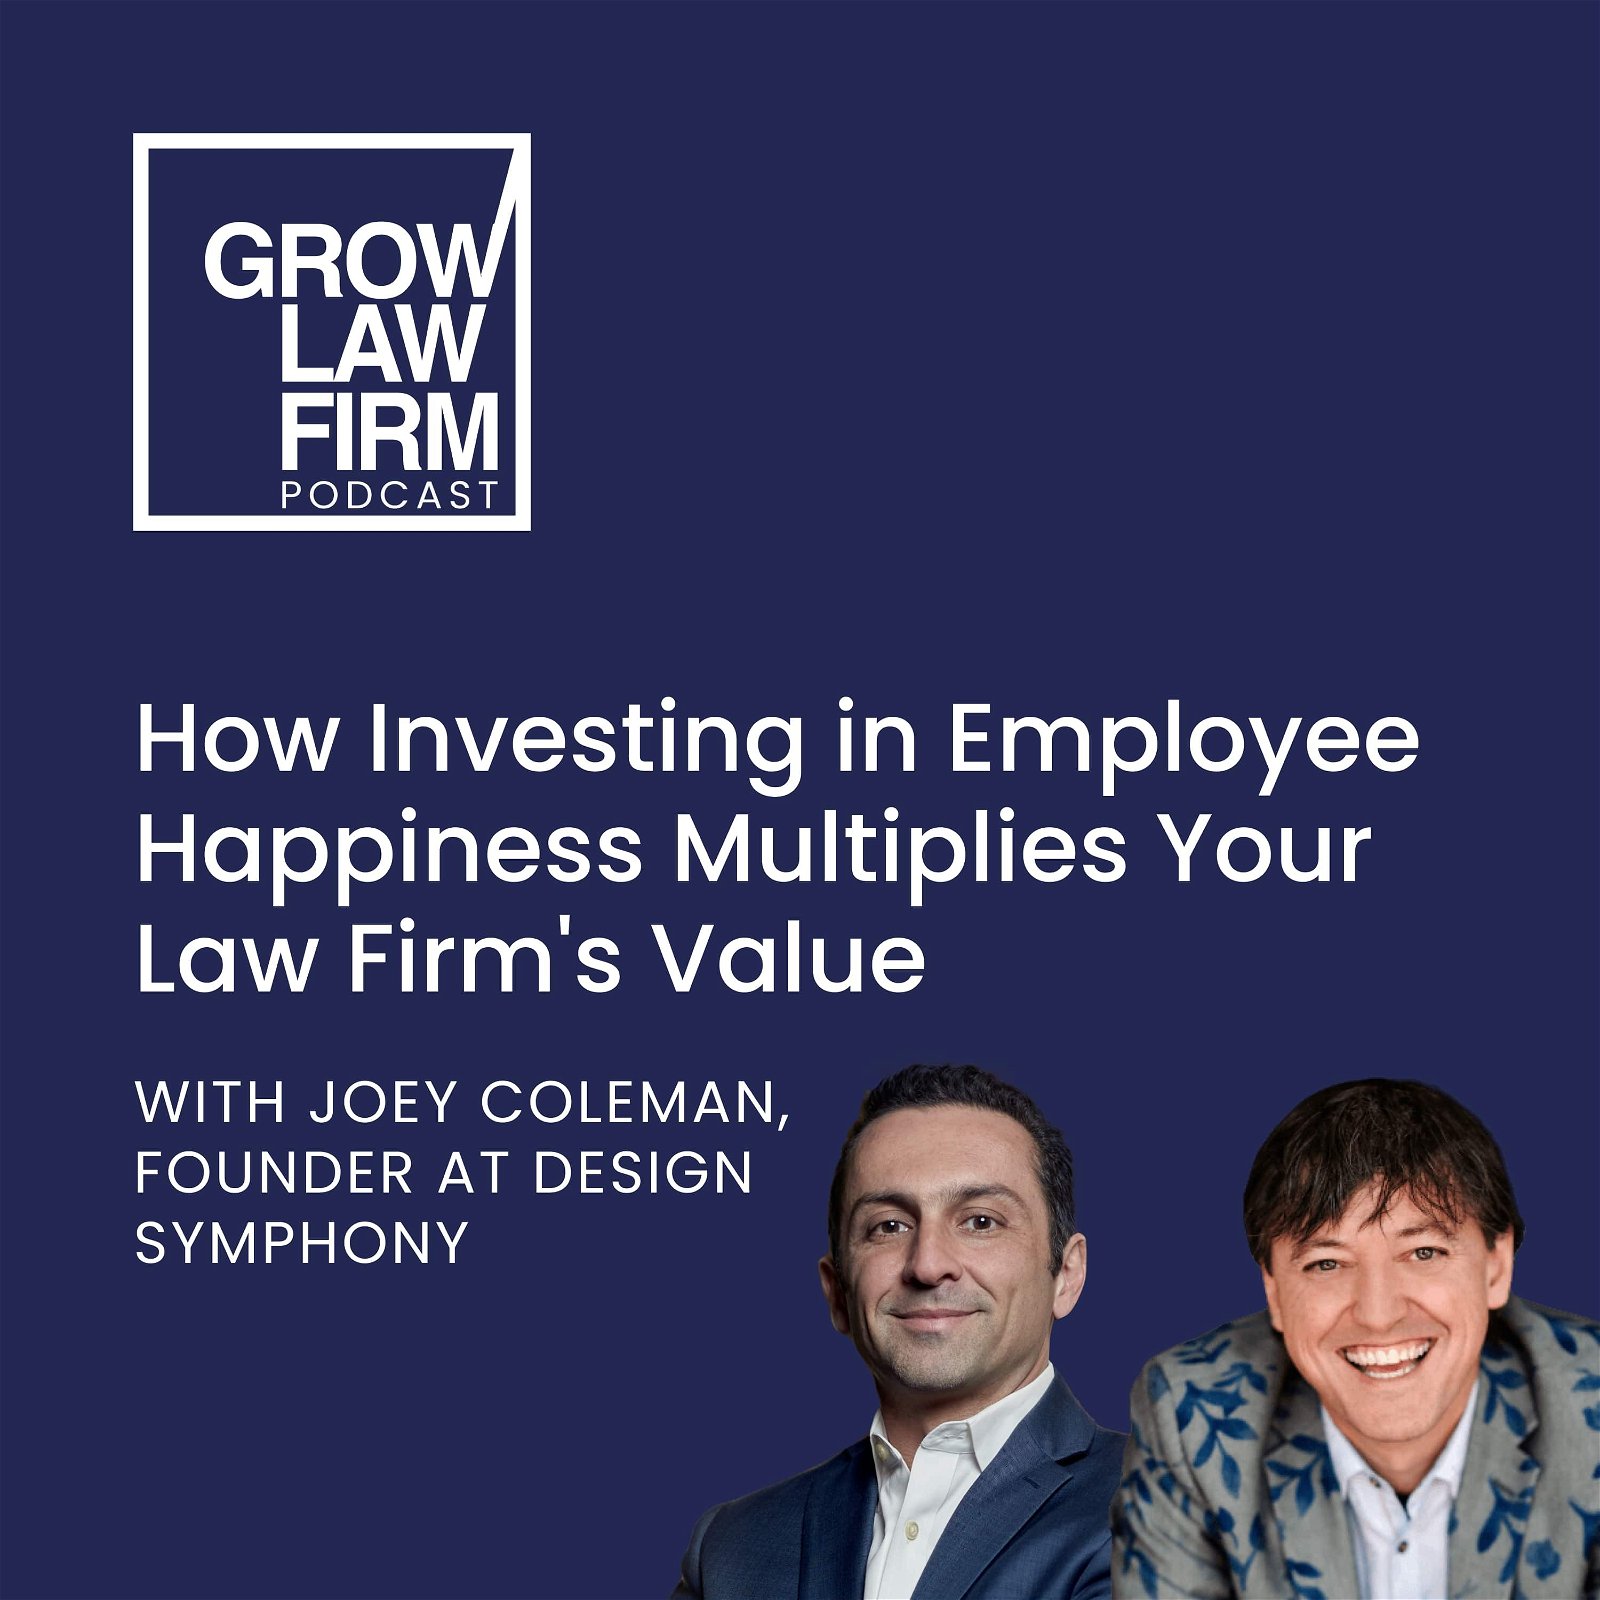 How Investing in Employee Happiness Multiplies Your Law Firm's Value with Joey Coleman, Founder at Design Symphony